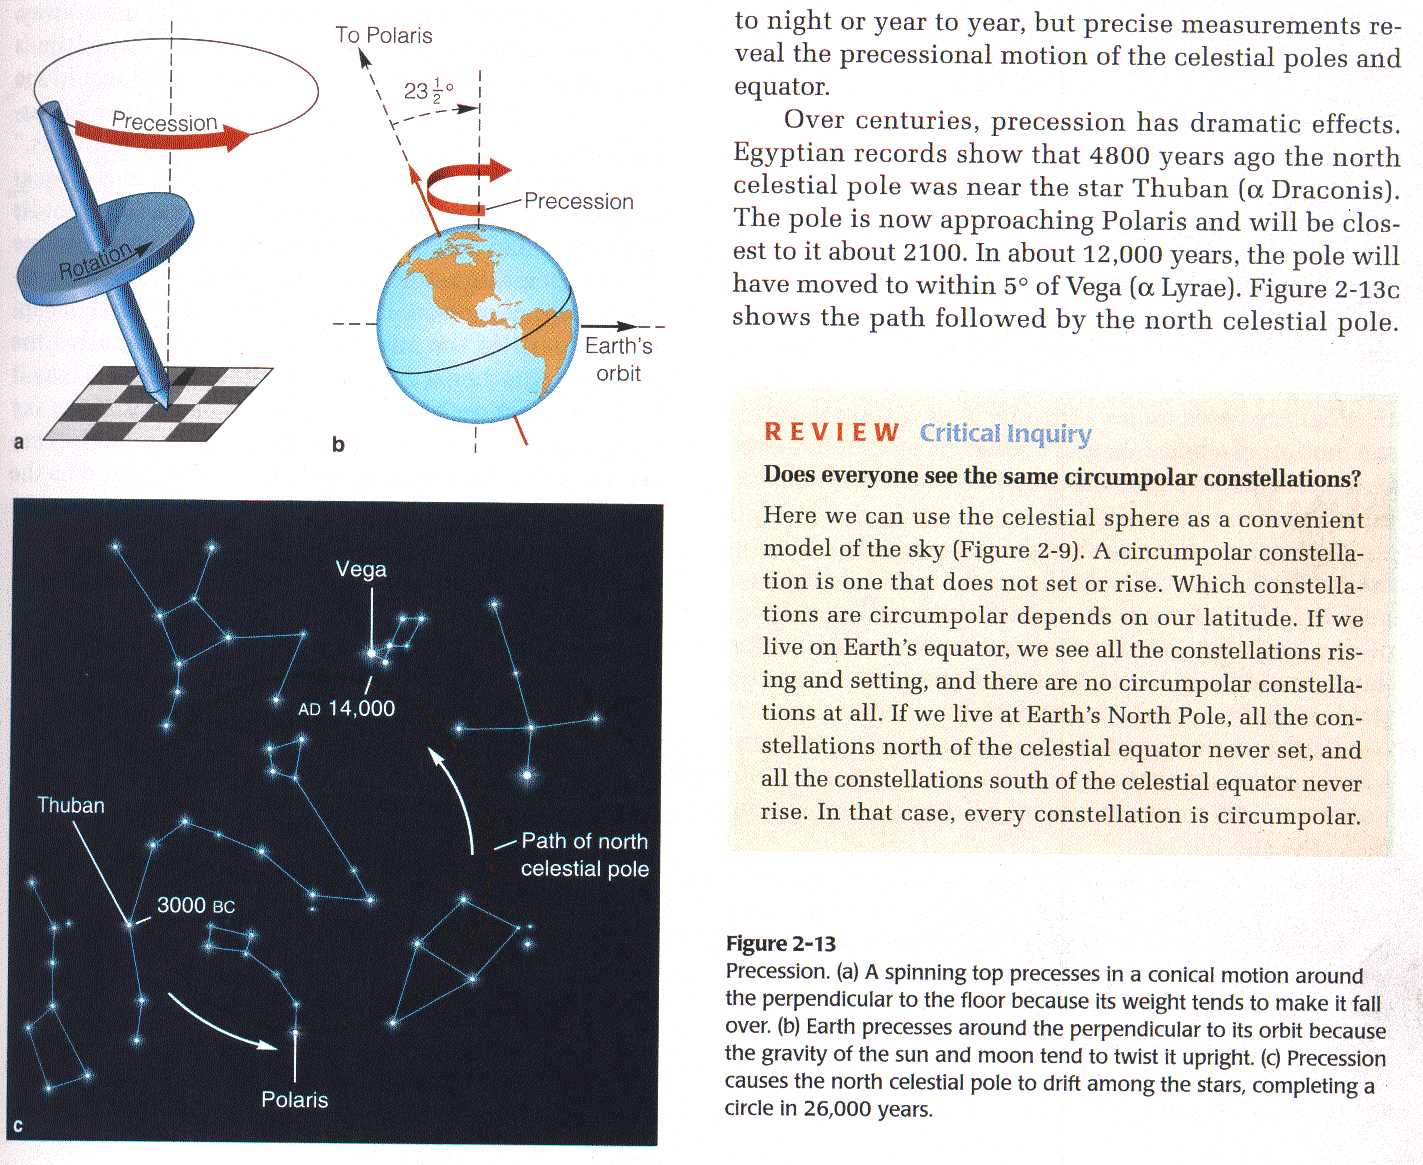 Text, diagrams, and drift of Polaris among the stars.